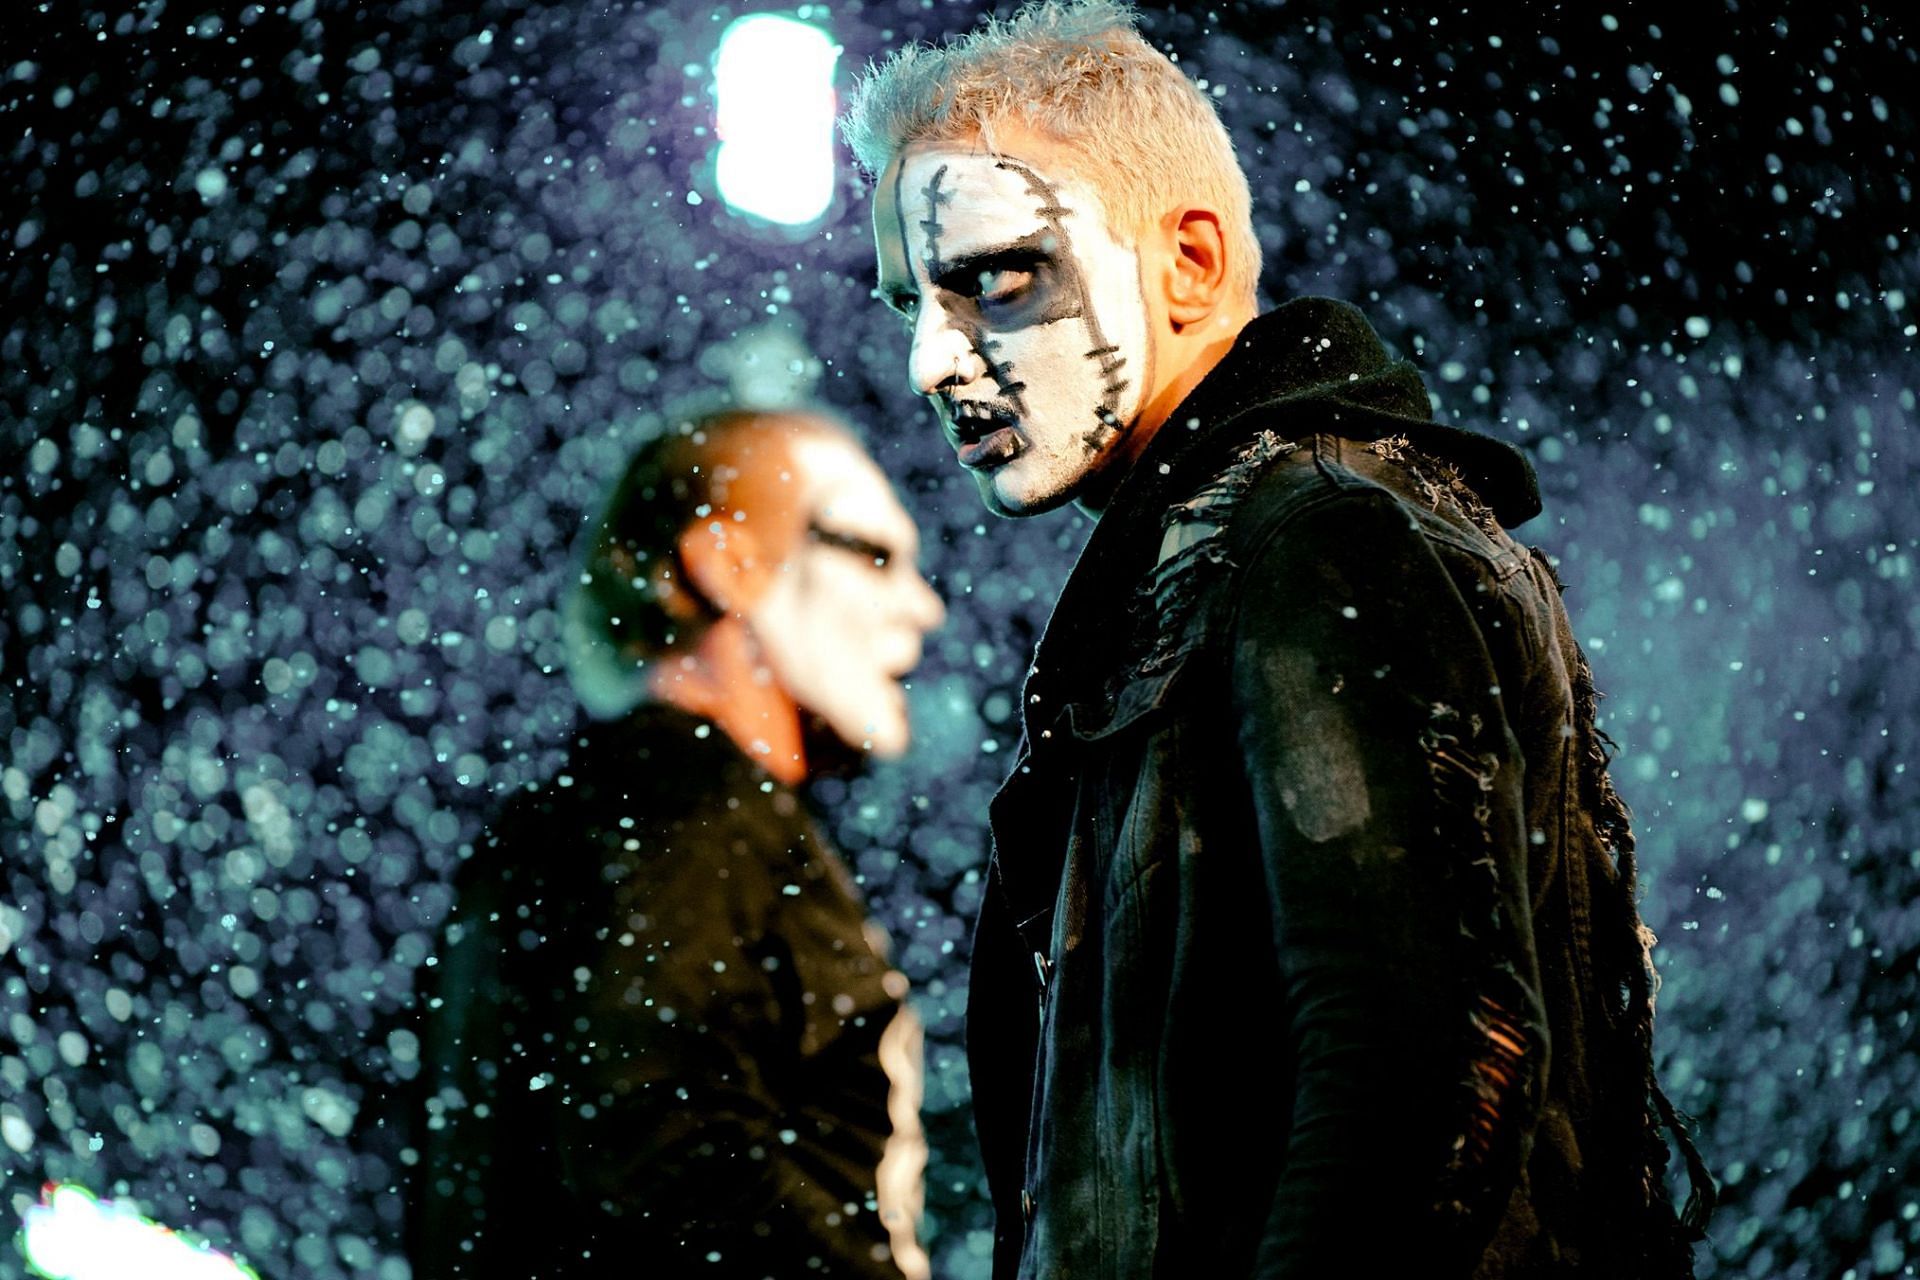 Darby Allin and Sting surprised fans after AEW Dynamite